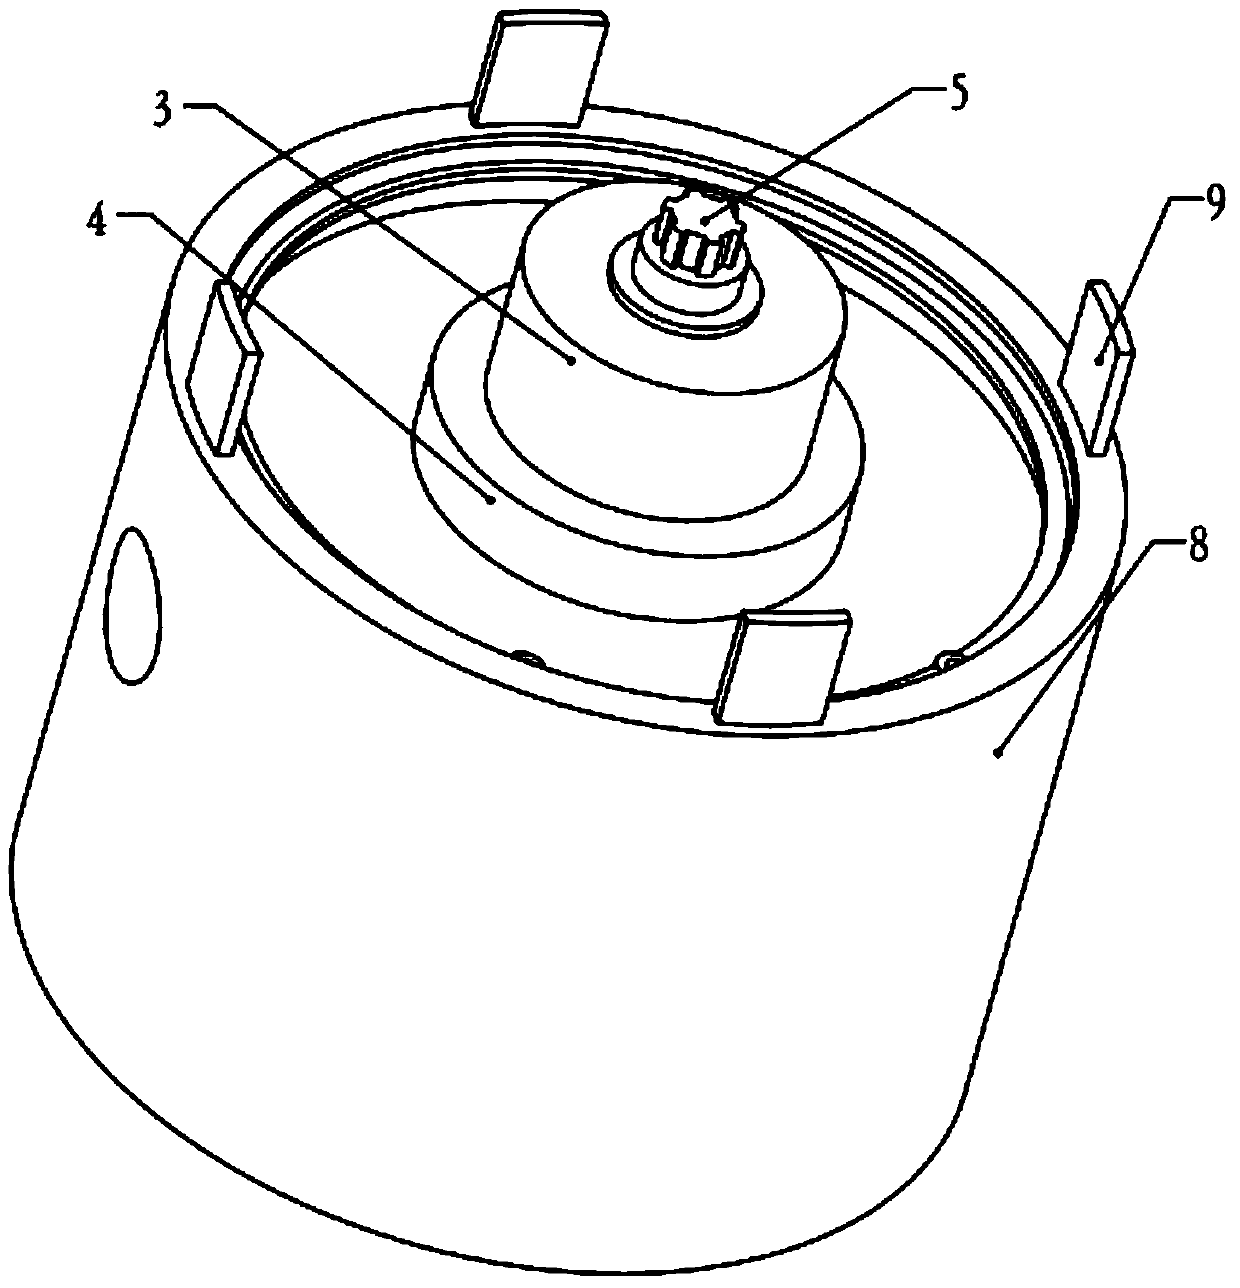 Piston with variable lift compression ratio